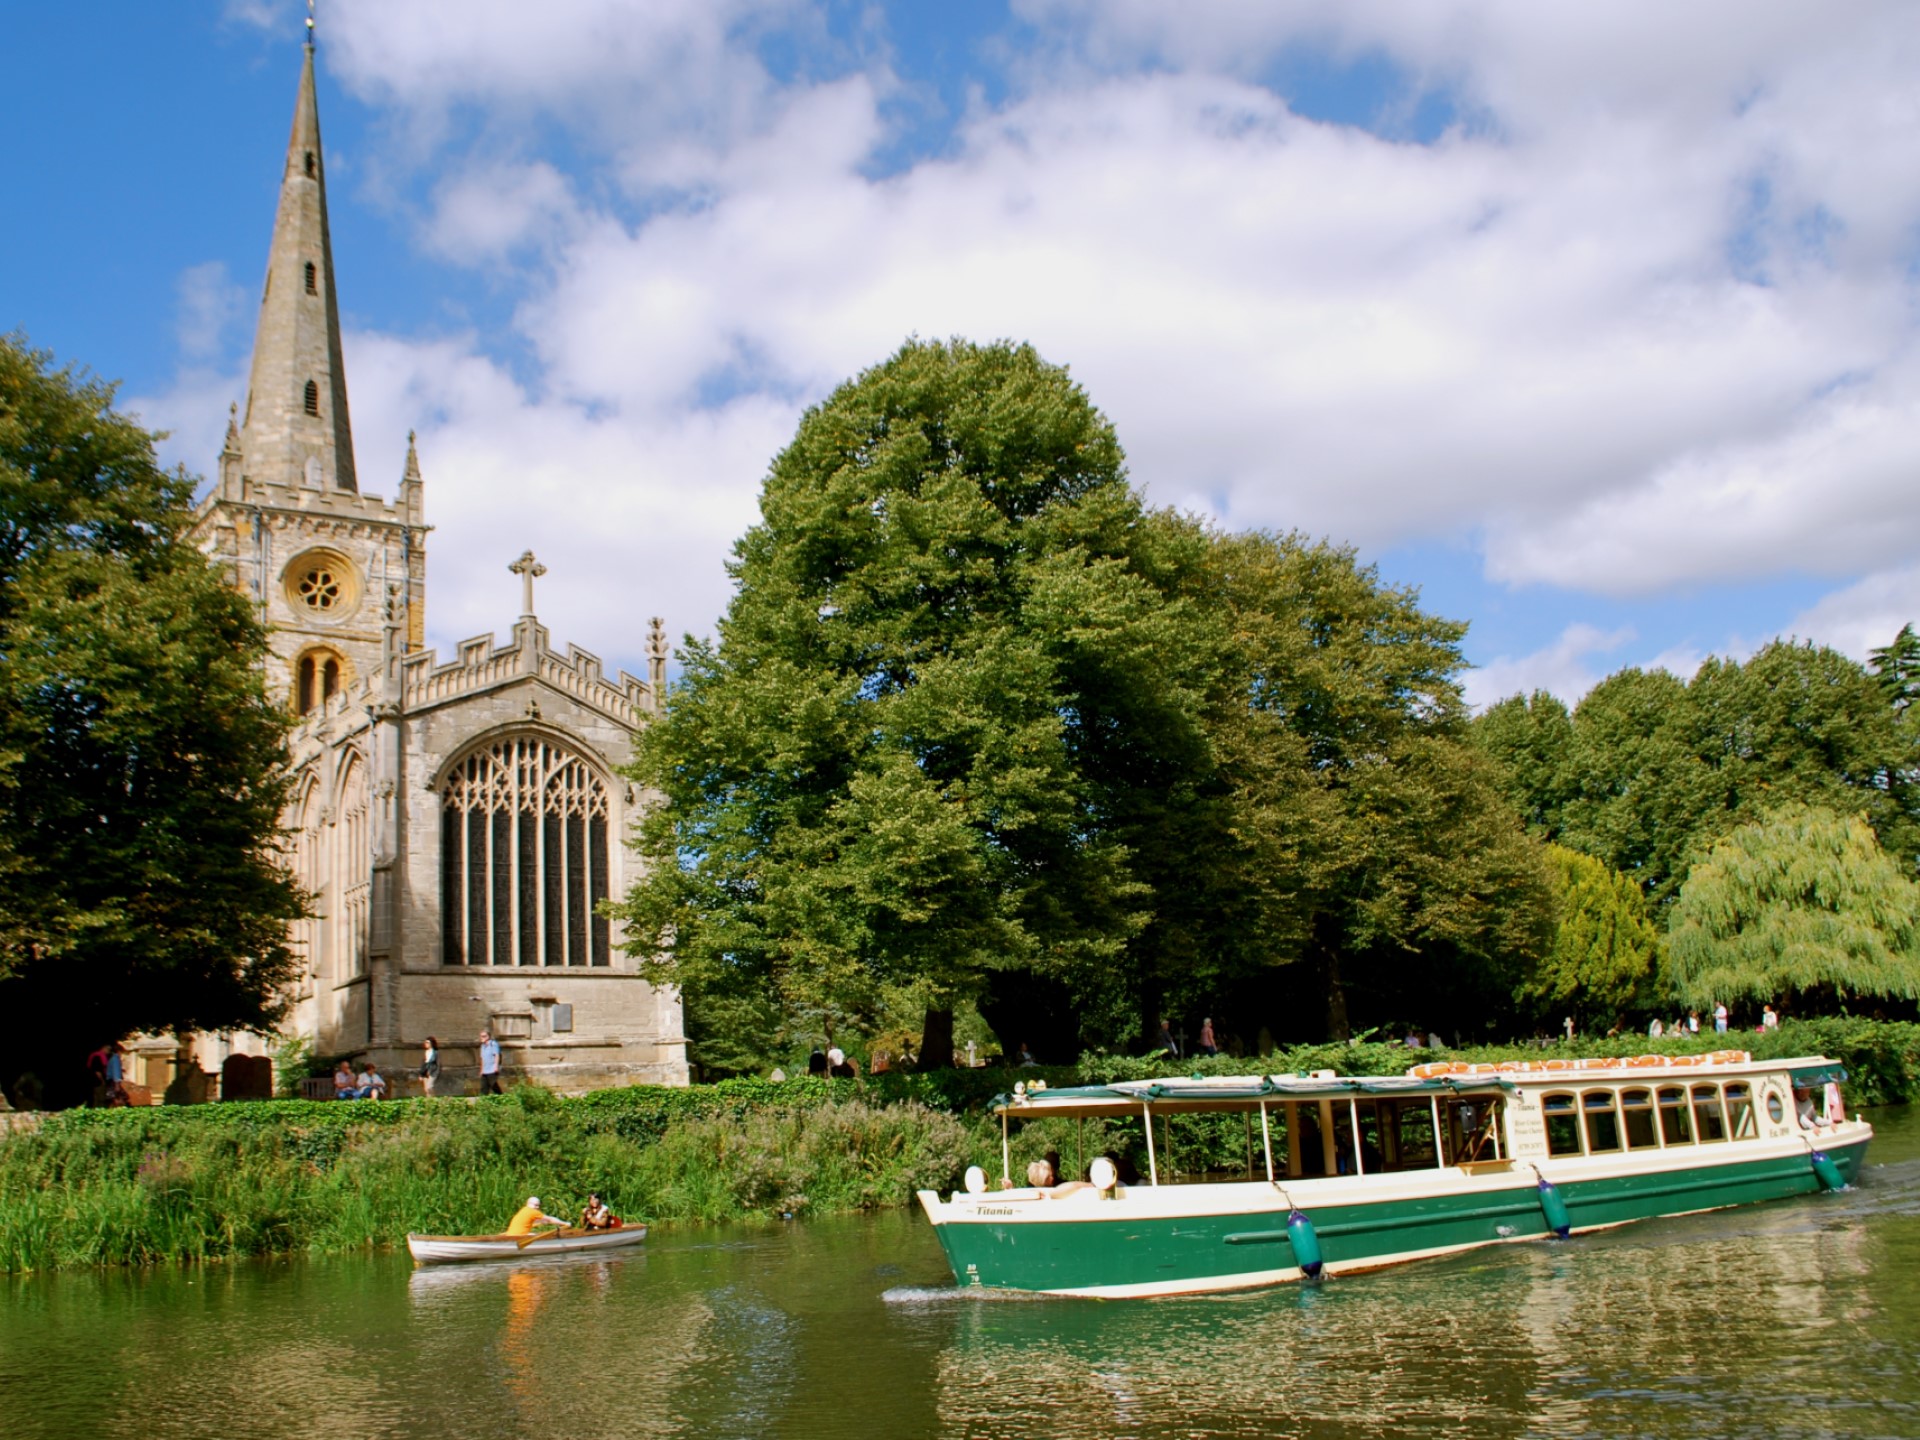 Holy Trinity Church and the River Avon in Stratford-upon-Avon